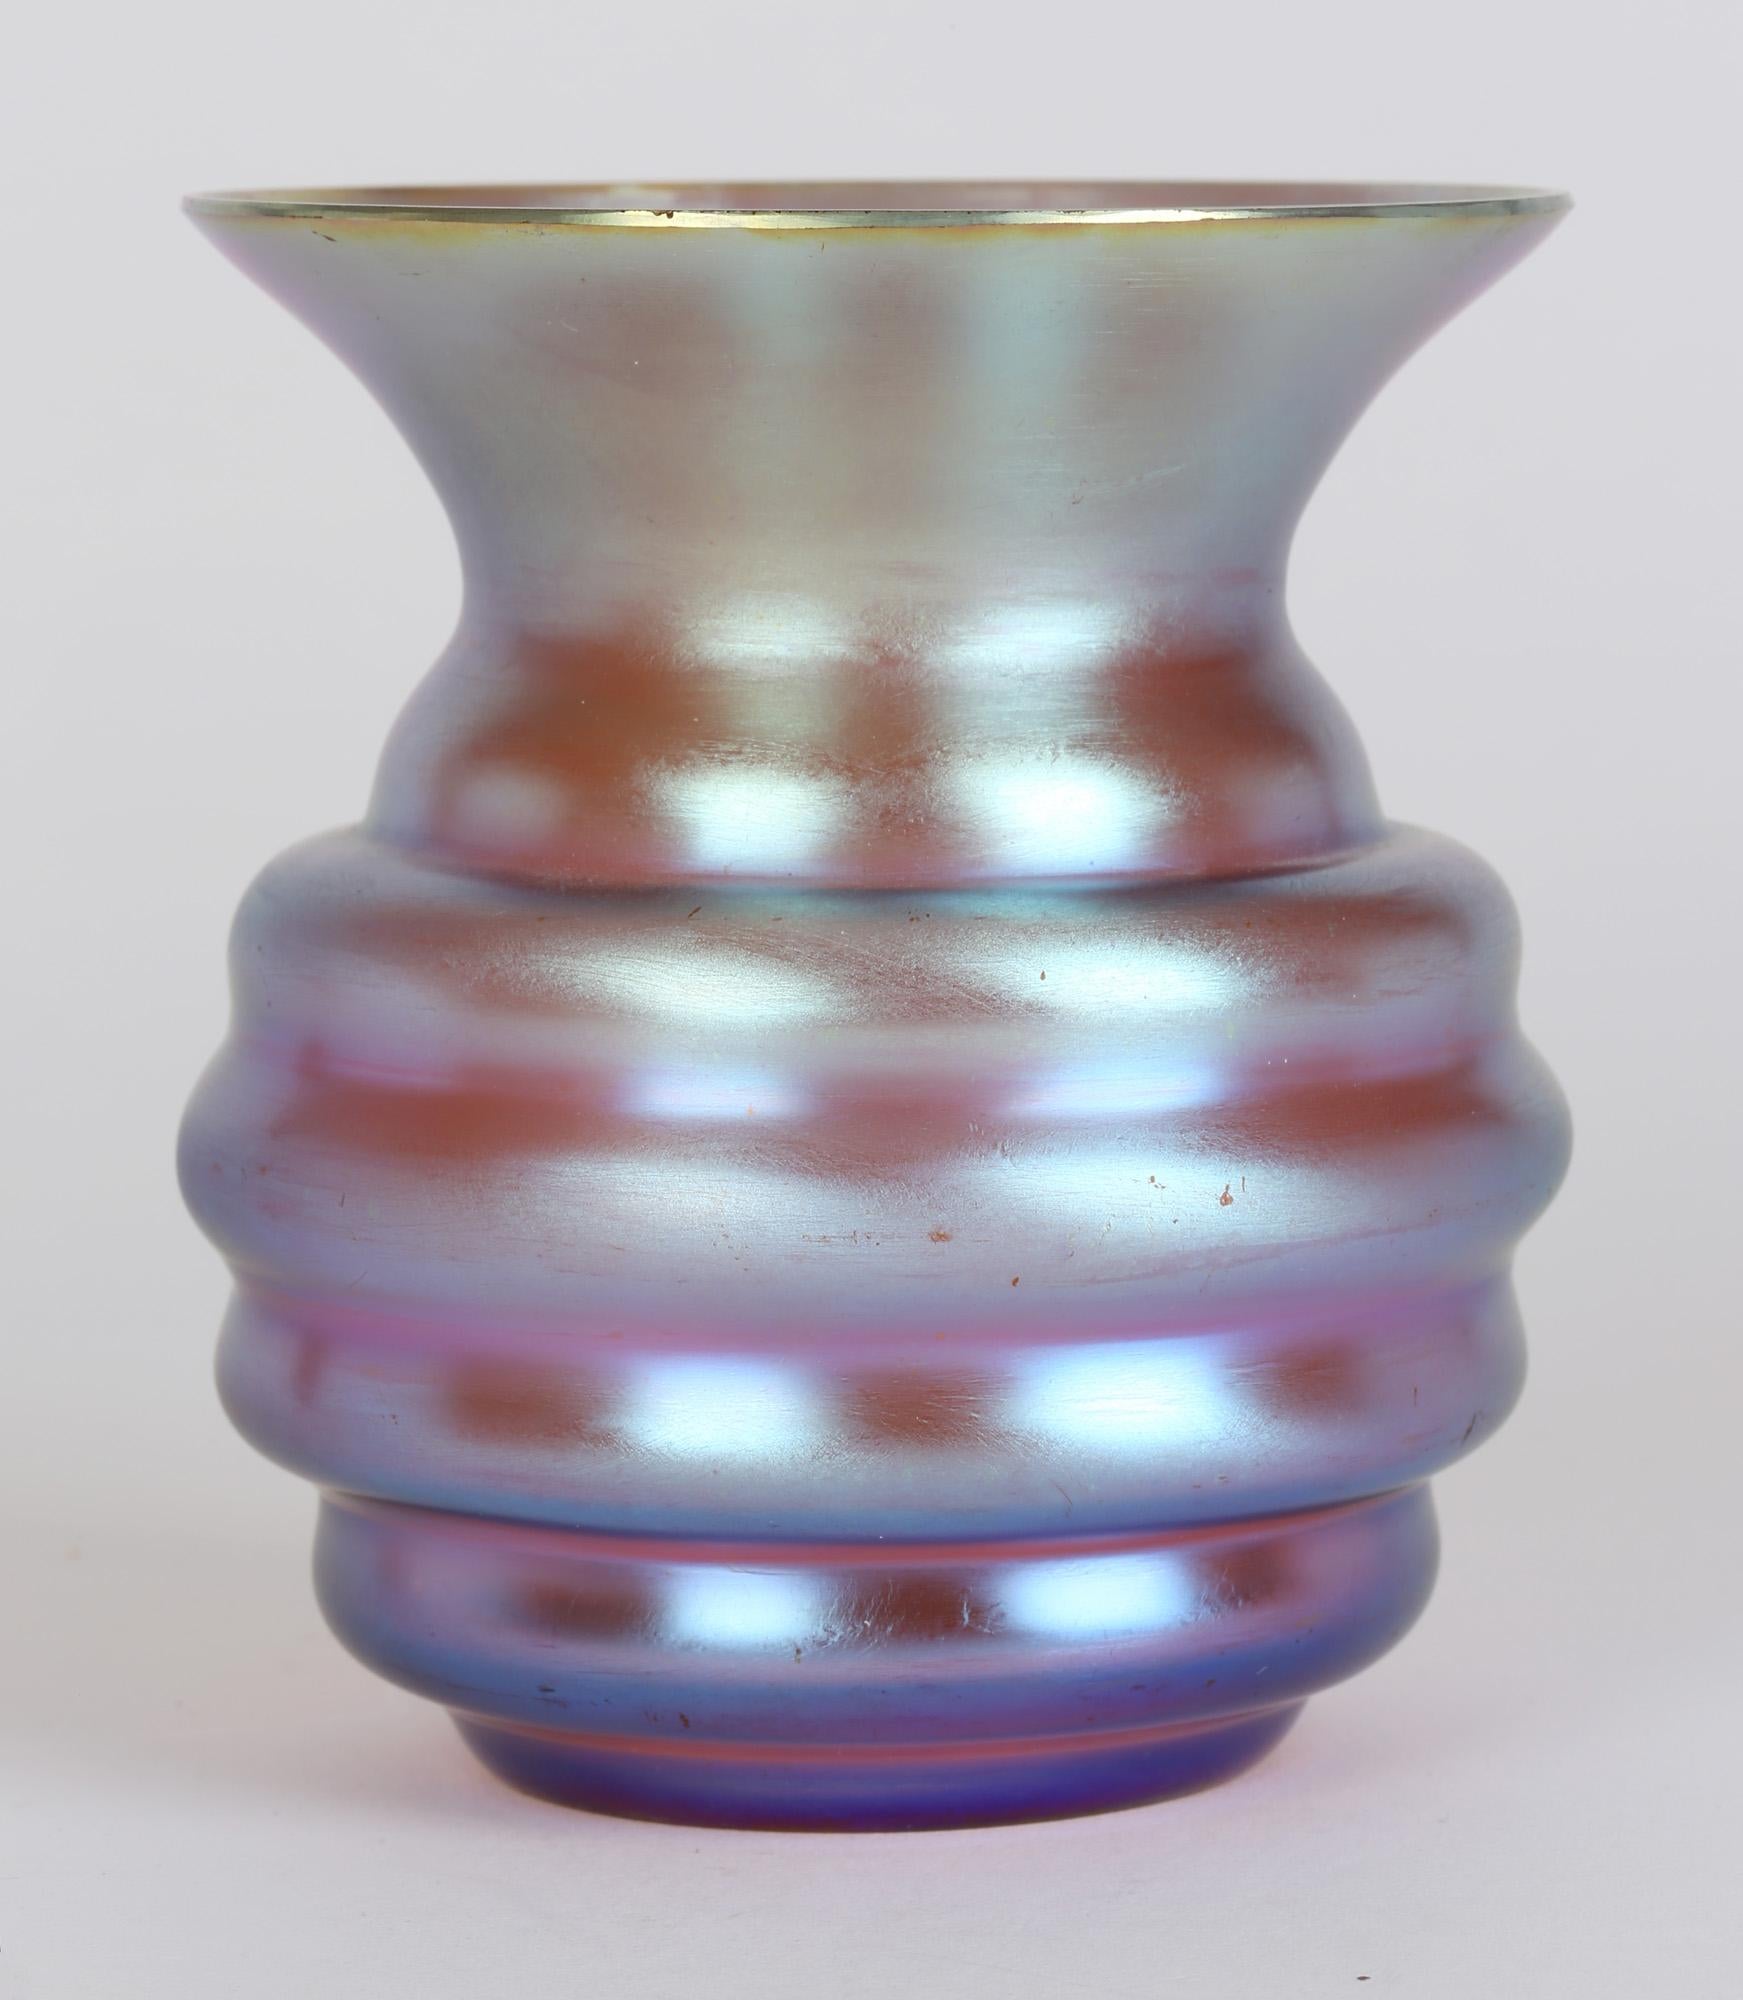 A very fine German Art Deco Myra Kristal amber glass vase with a wonderful blue iridescence vase made by WMF (Württembergische Metallwarenfabrik) and dating between 1926 and 1936. Designed by Karl Wiedmann this stylish vase stands on a narrow